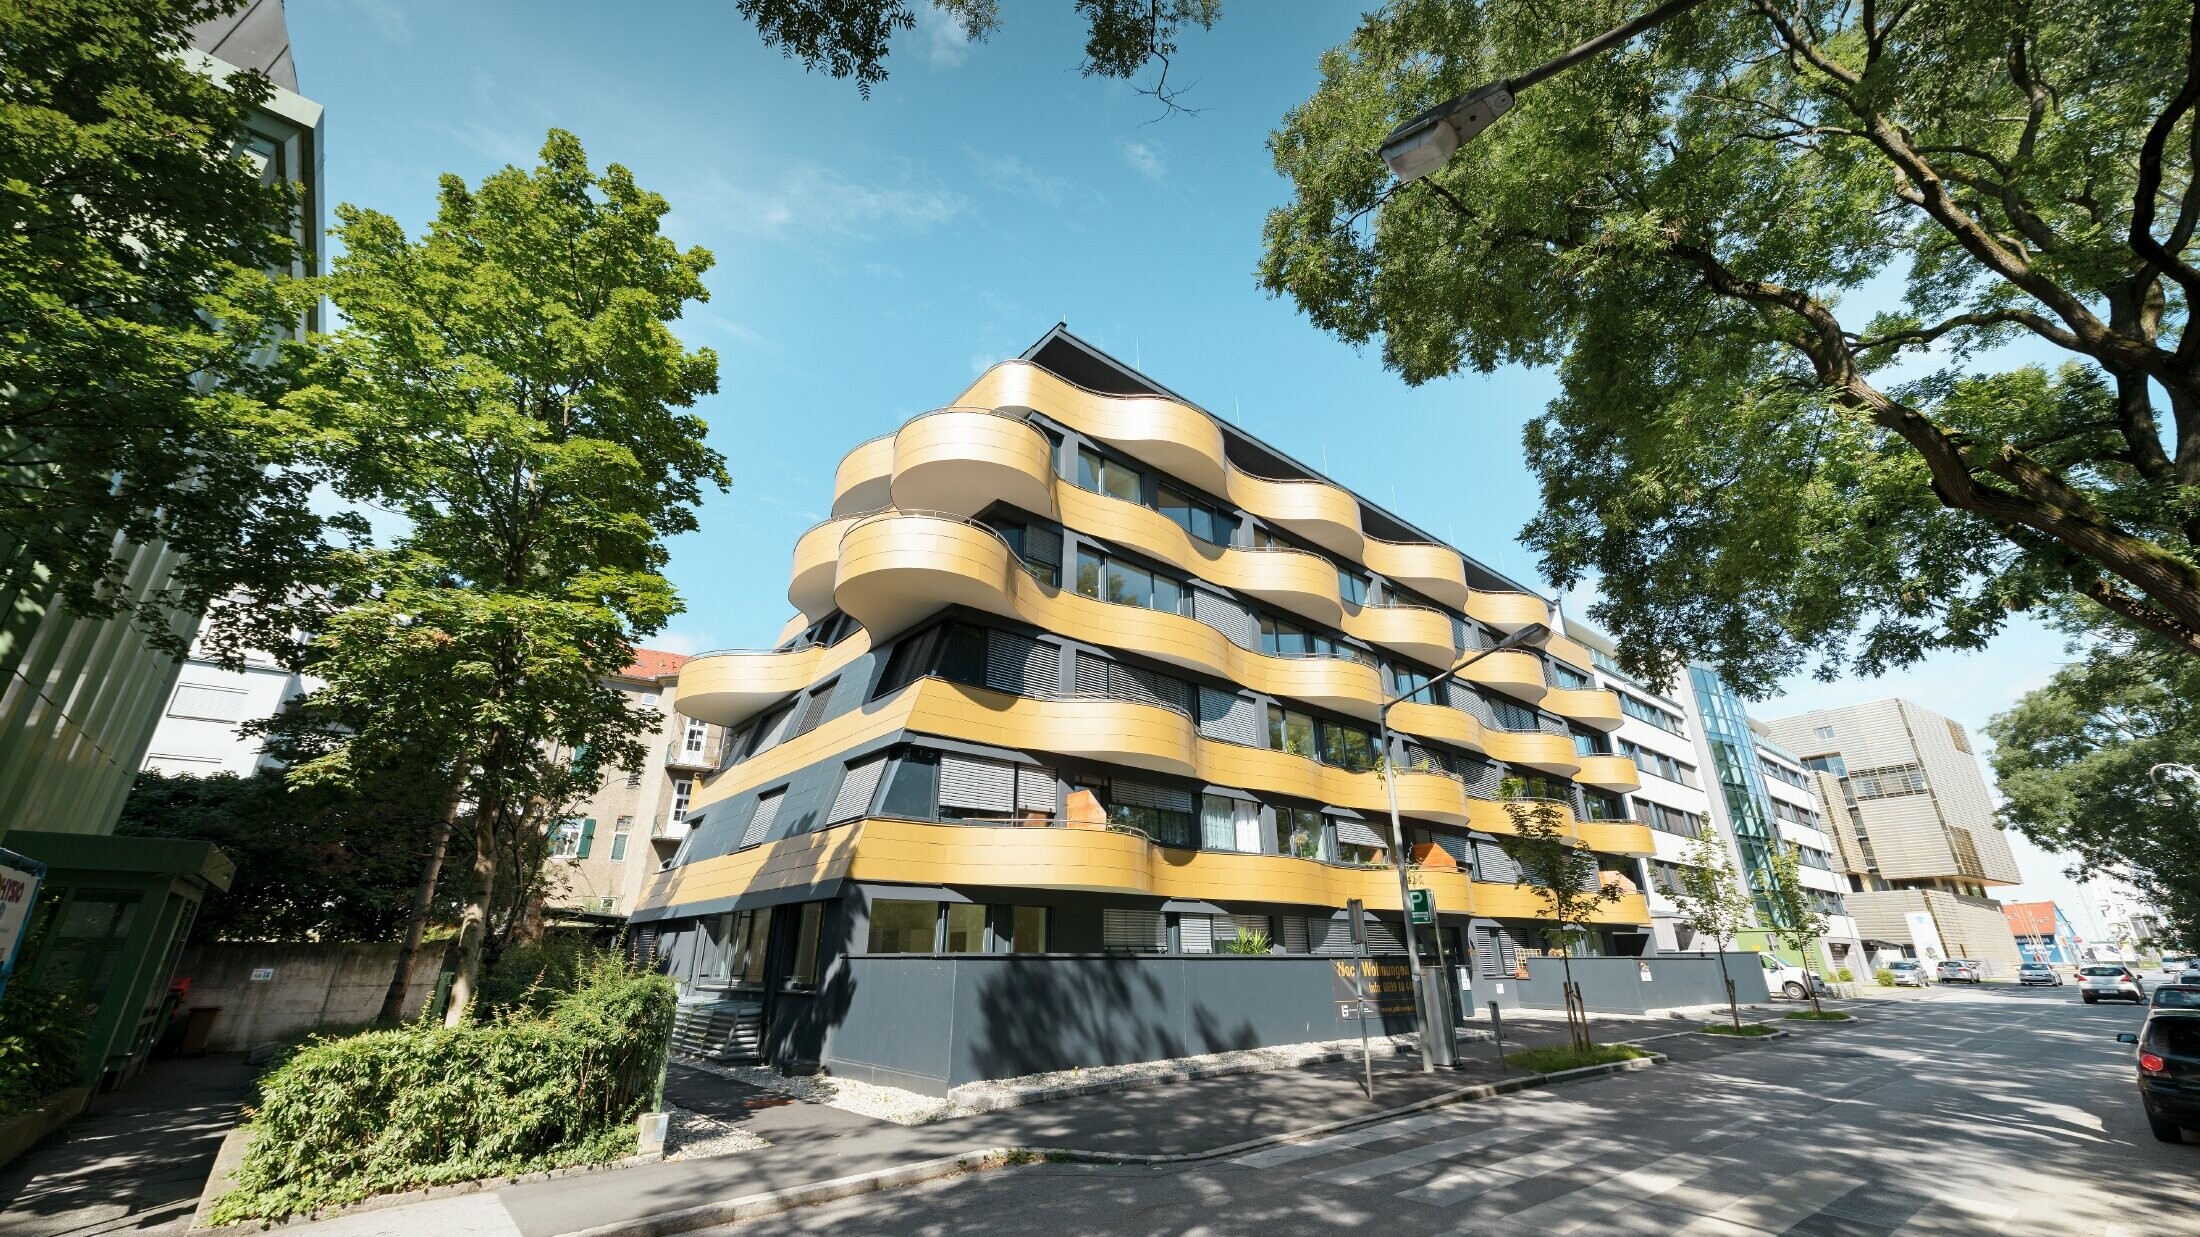 “Goldene Welle” (Golden Wave) apartment complex in Graz, Austria, with aluminum composite panels in gold, the balconies were rounded in waves 